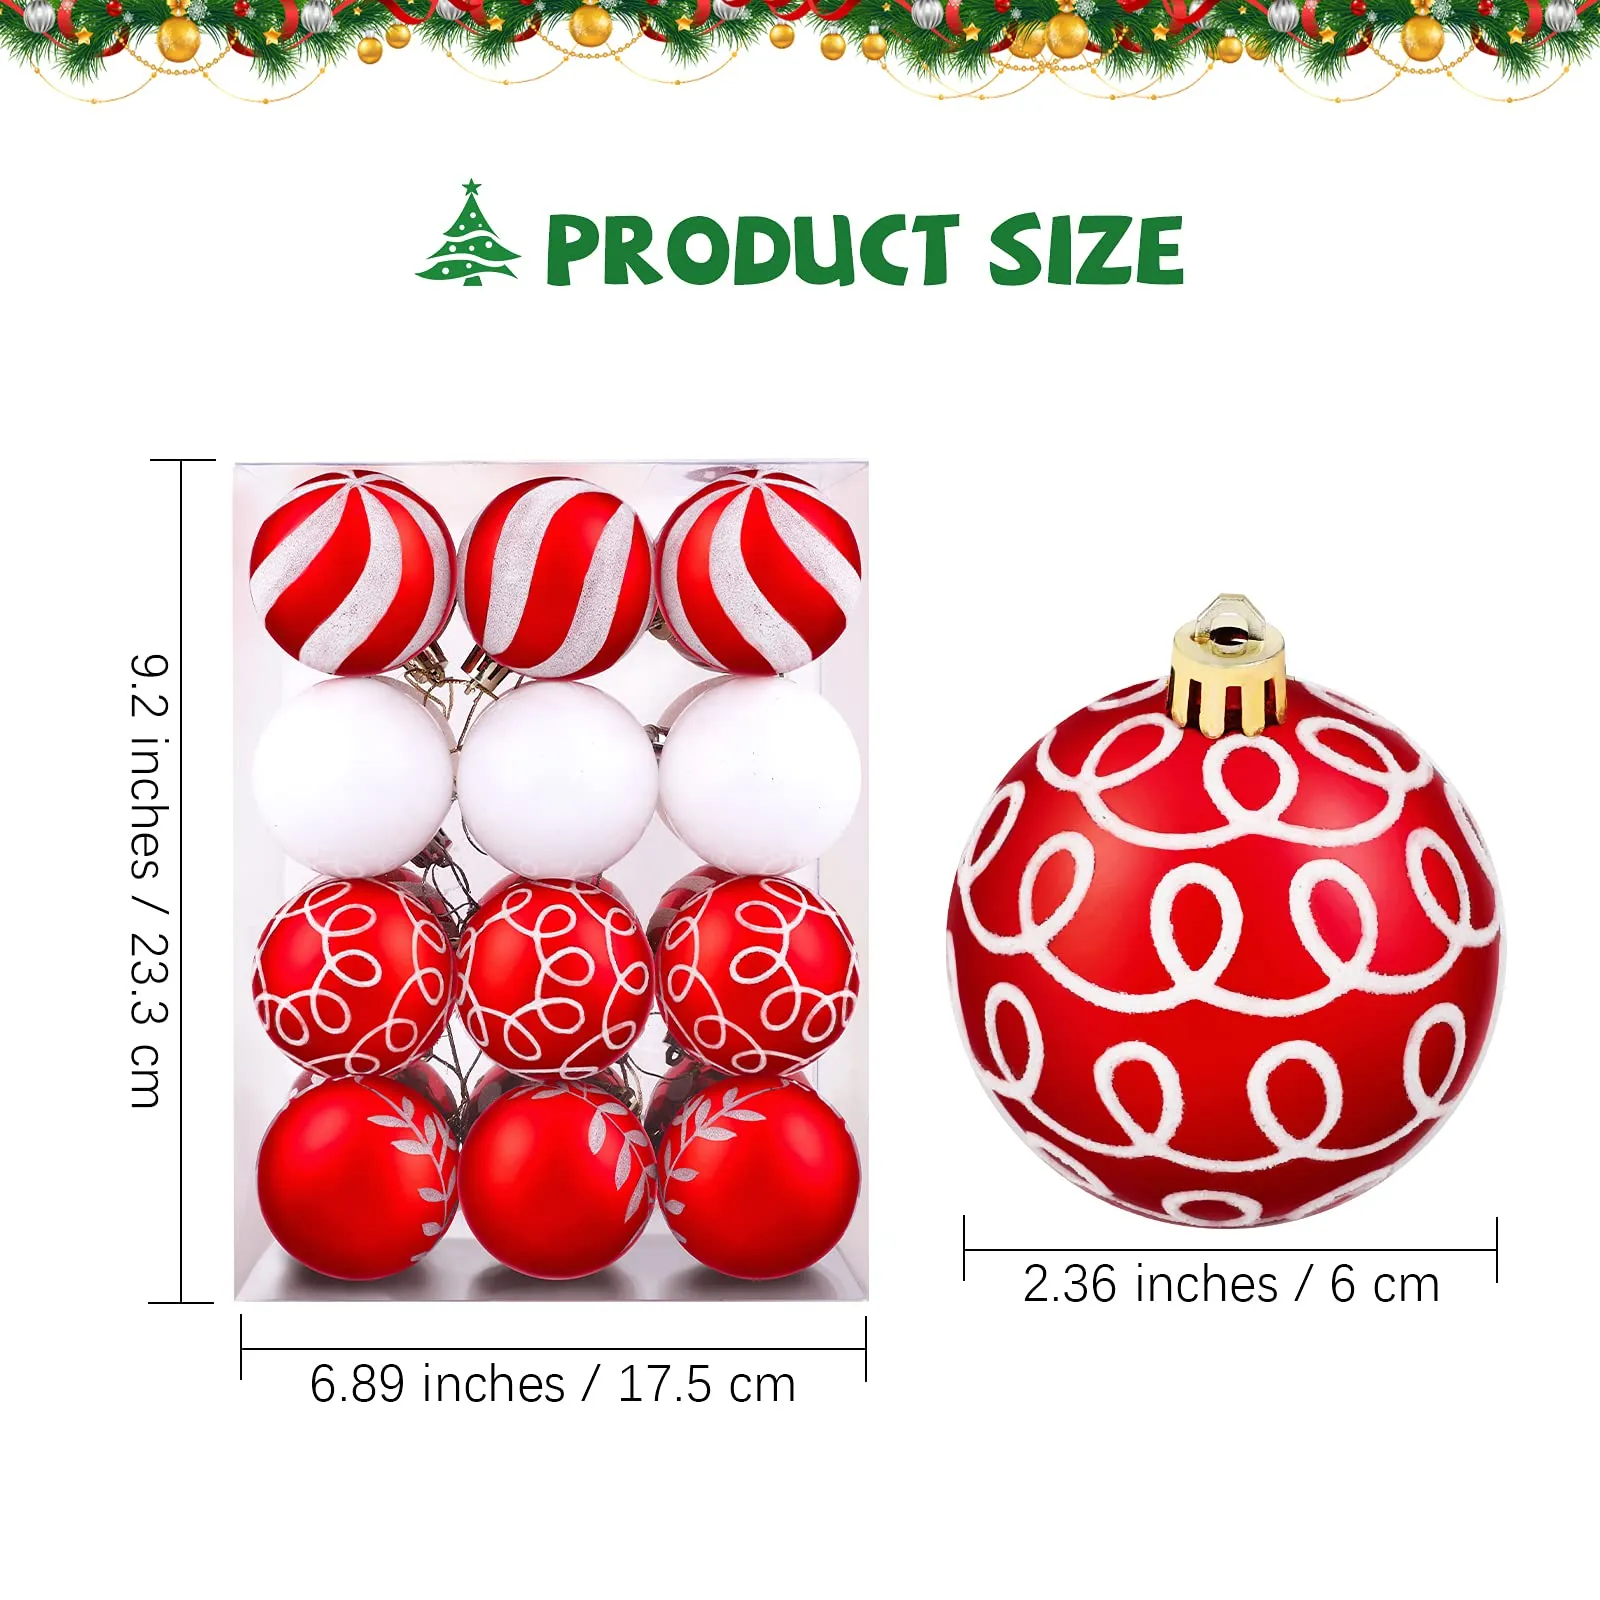 christmas ball ornaments painting glittering christmas tree pendants shatterproof decorative baubles in 8 patterns for christmas tree decorations red and white